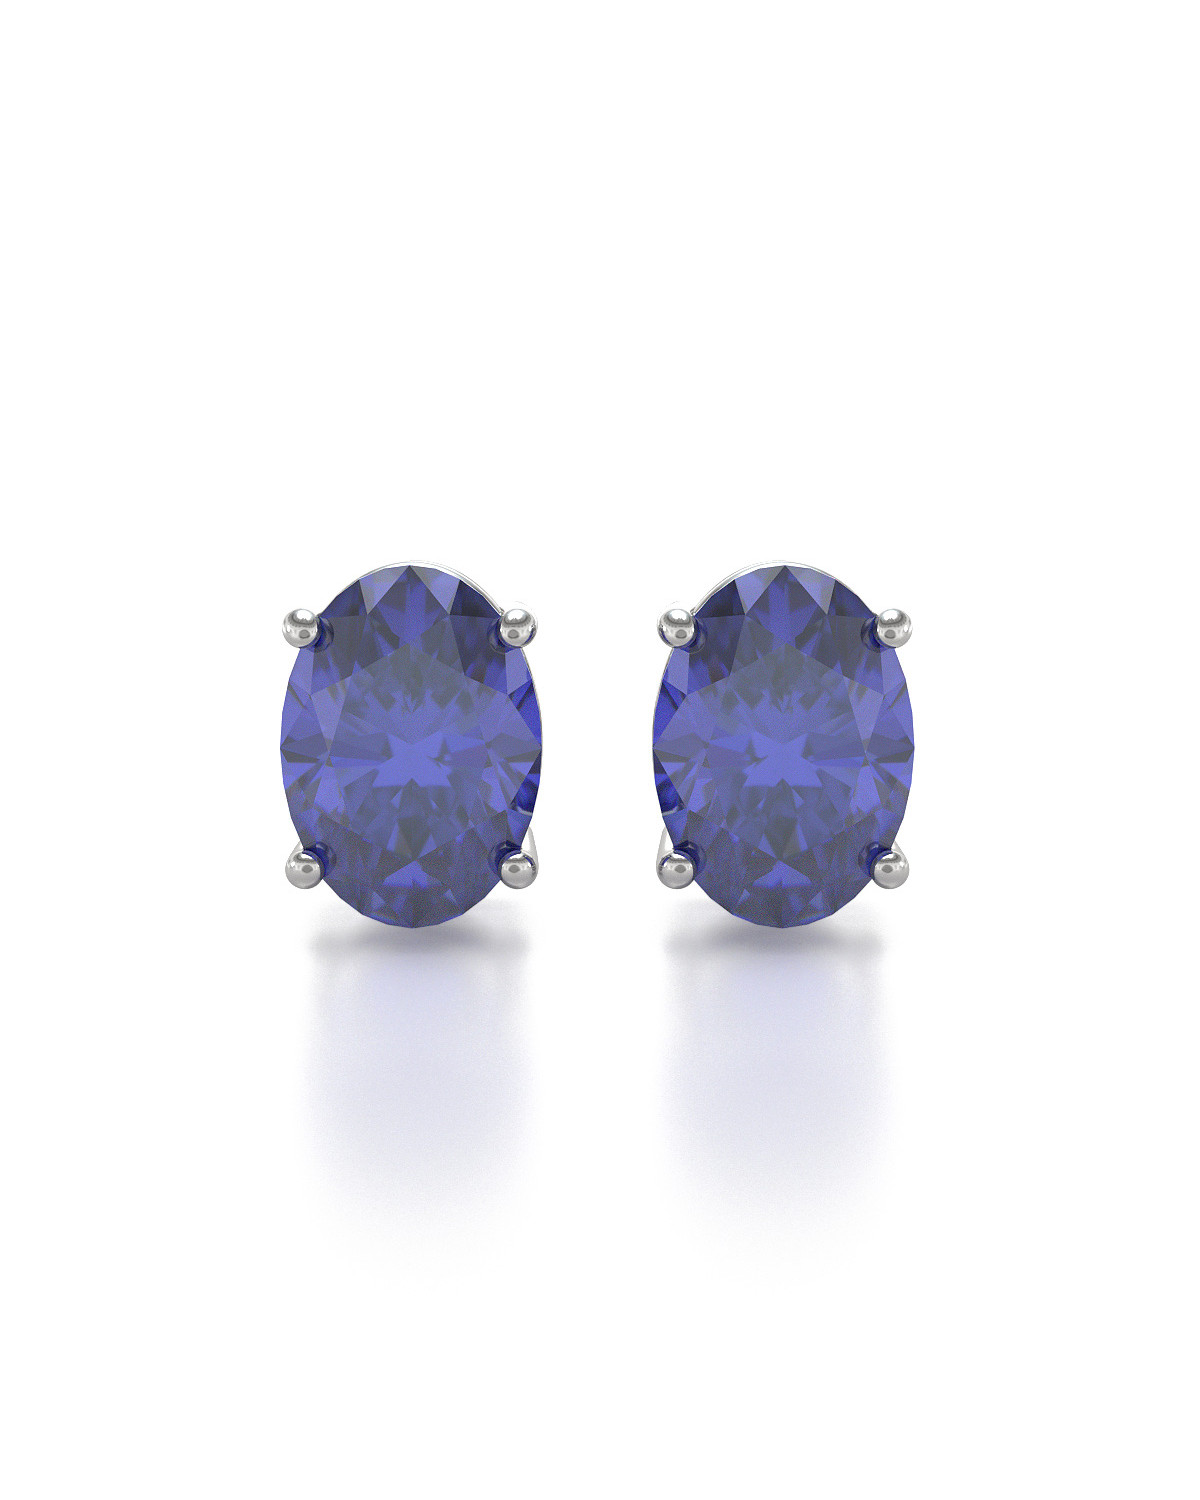 QTESNT-QE392TAN-SS Details about   925 Sterling Silver Genuine Tanzanite Earrings 0.94 Carat 